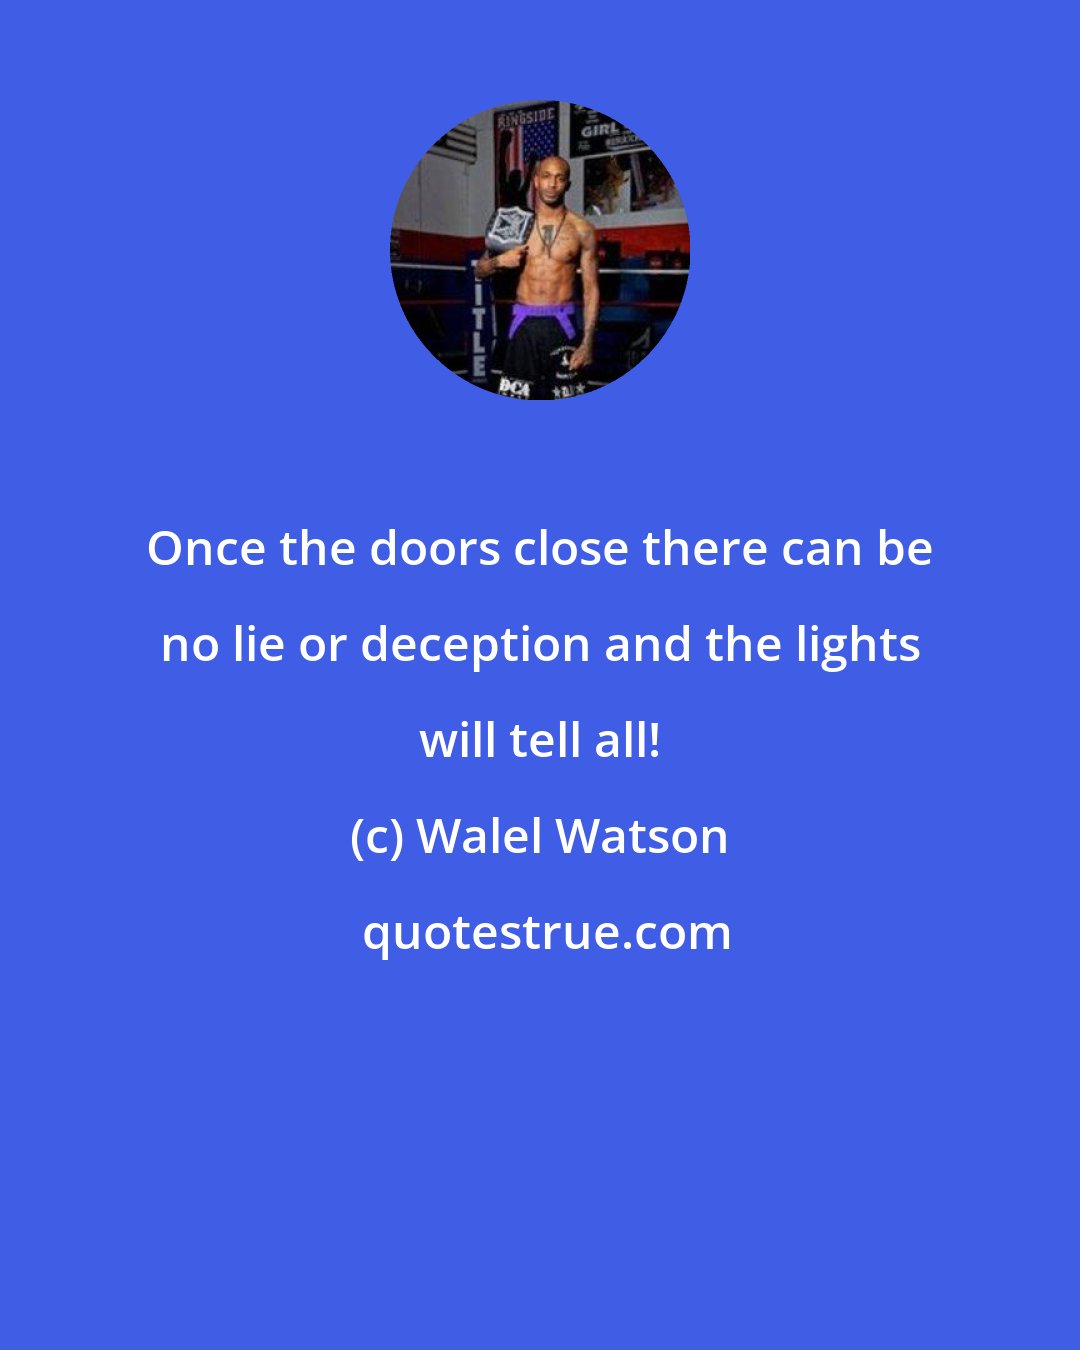 Walel Watson: Once the doors close there can be no lie or deception and the lights will tell all!